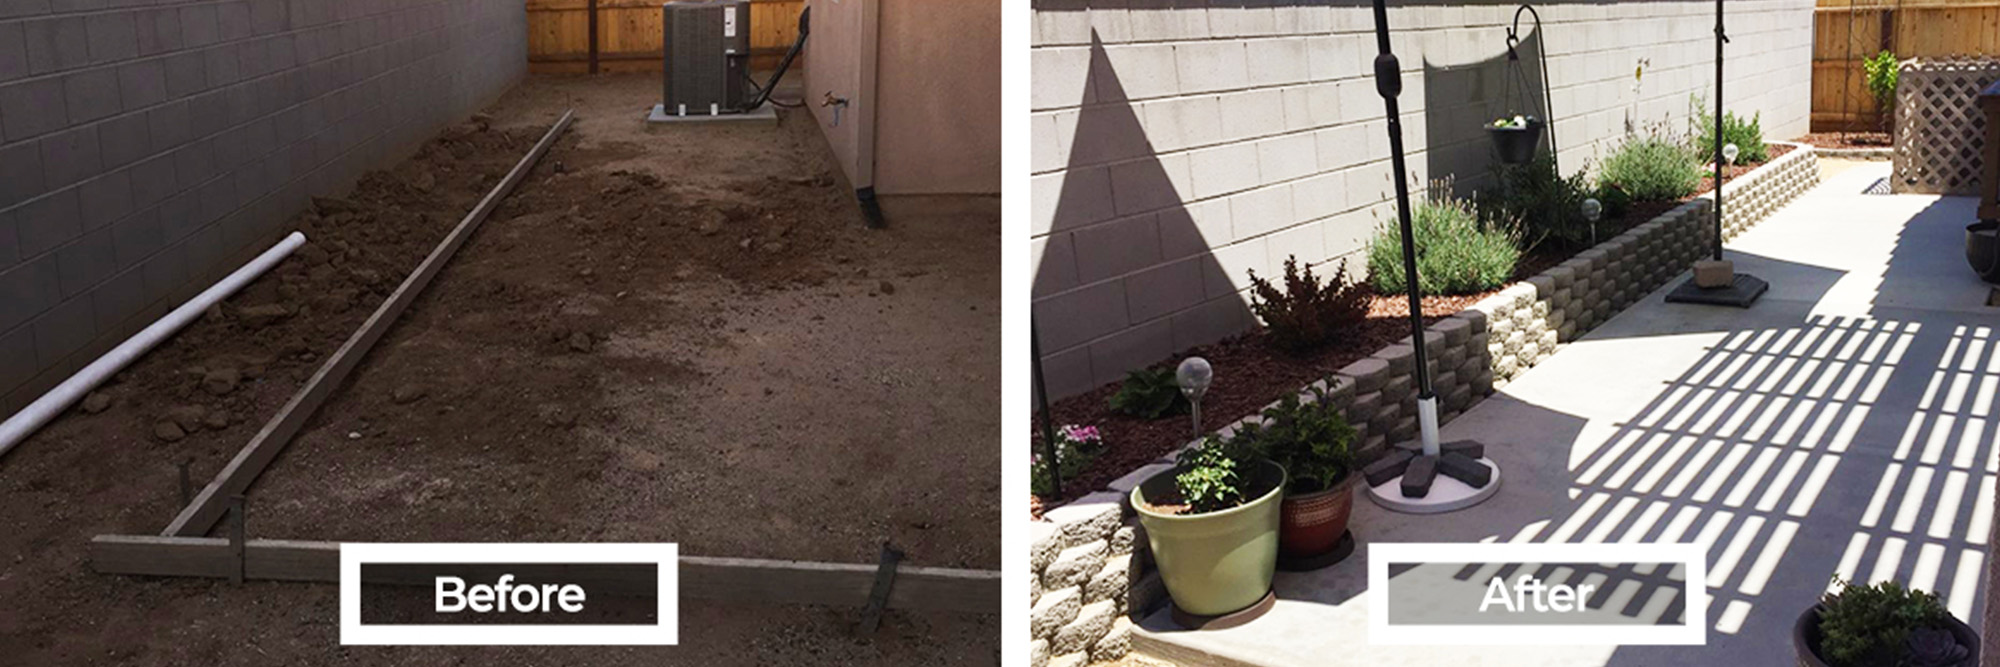 Backyard before had only dirt.  After concrete and a retaining wall, it created a nice living space.